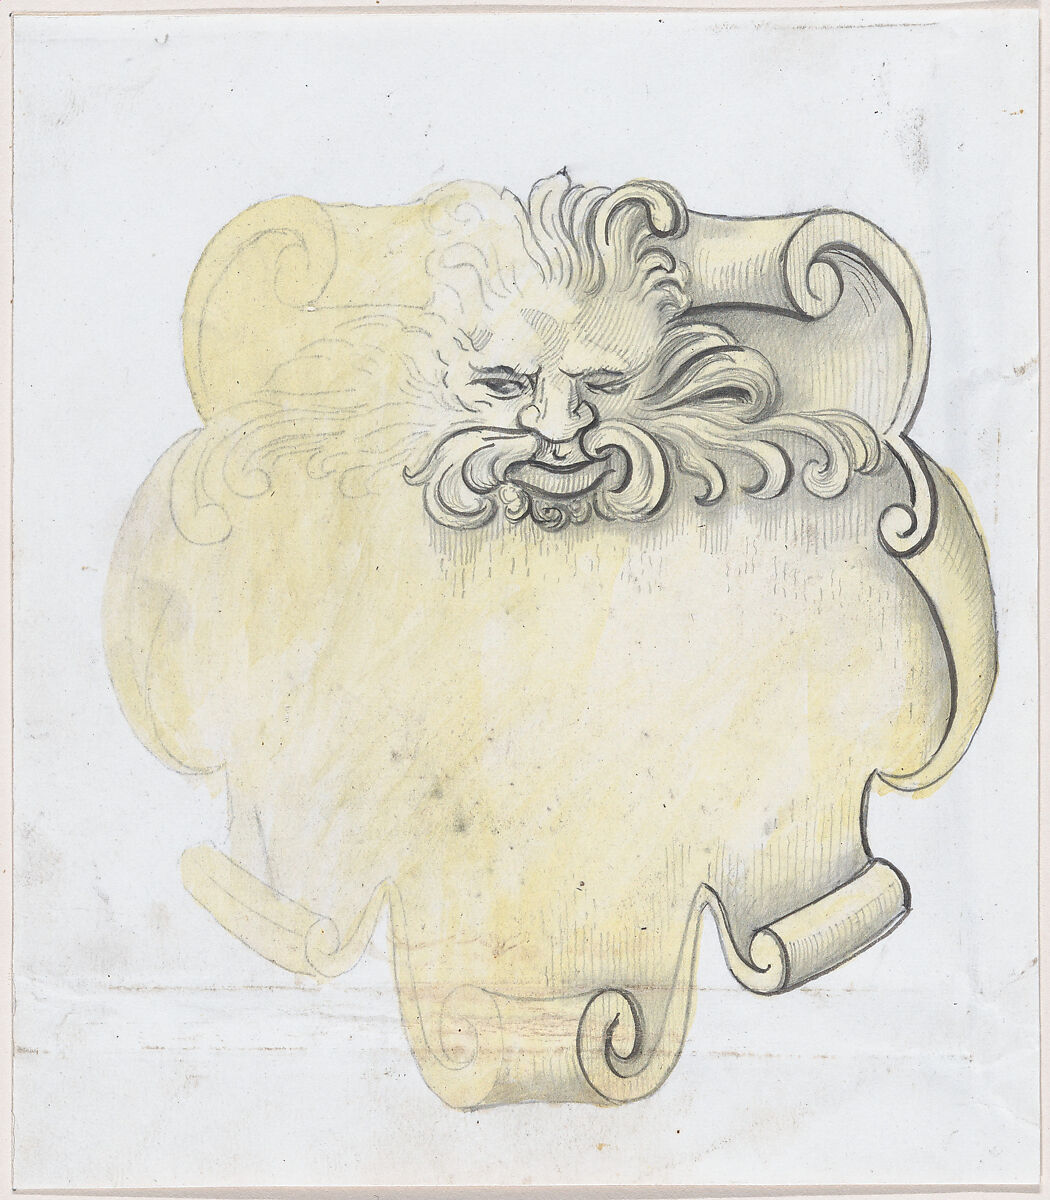 Study for a bronze name plate for Edward D. Adams, Alphonse Legros (French, Dijon 1837–1911 Watford, Hertfordshire), Graphite, pen and ink, and watercolor 